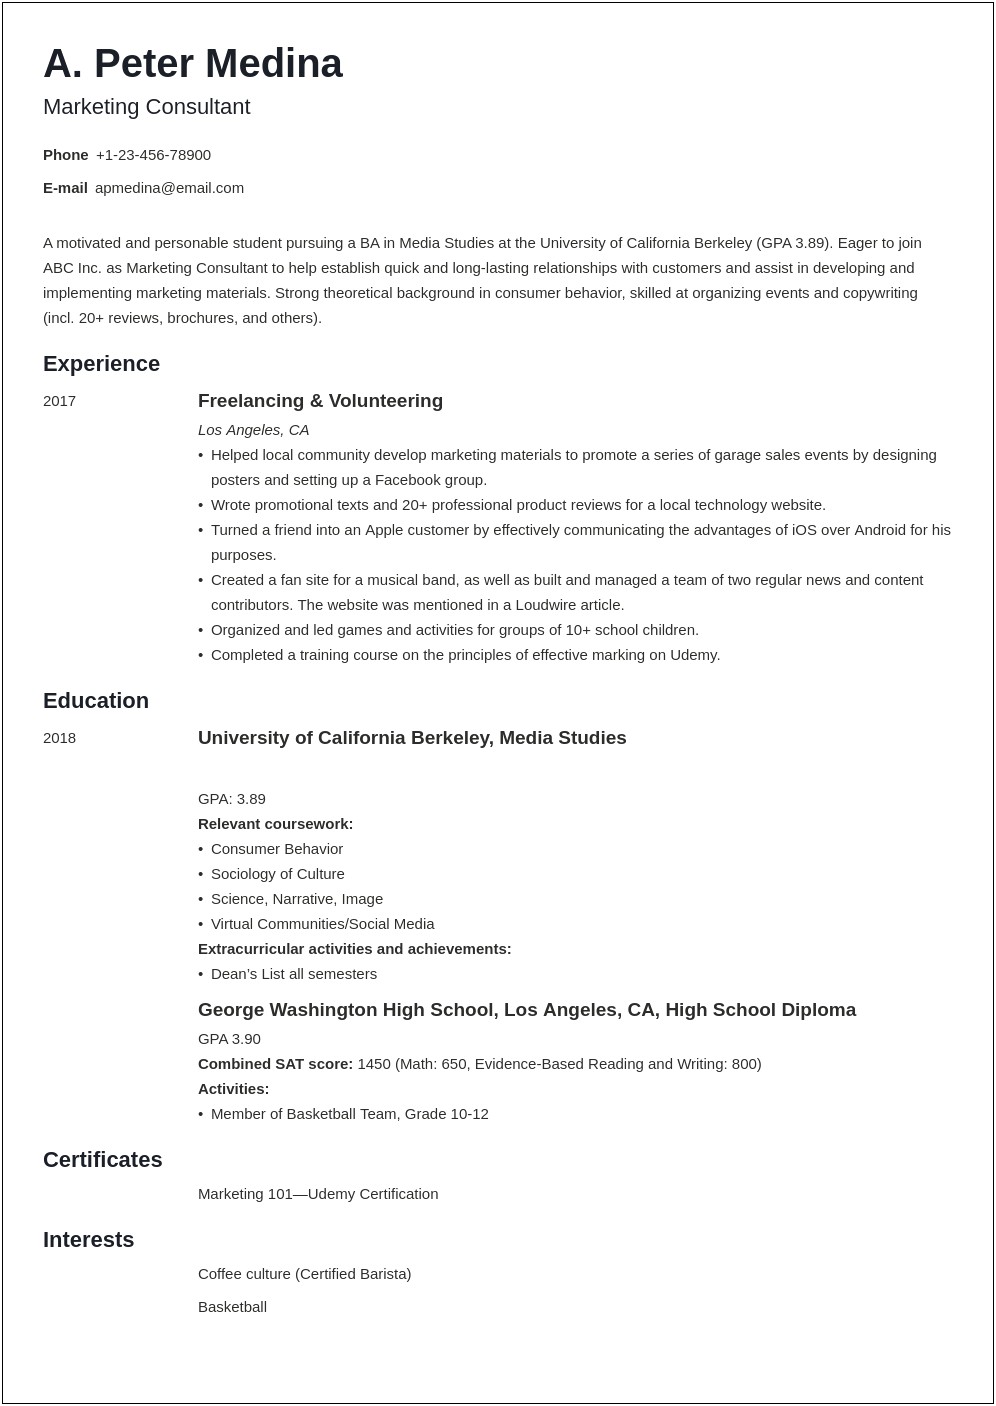 College Resume With No Work Experience Example